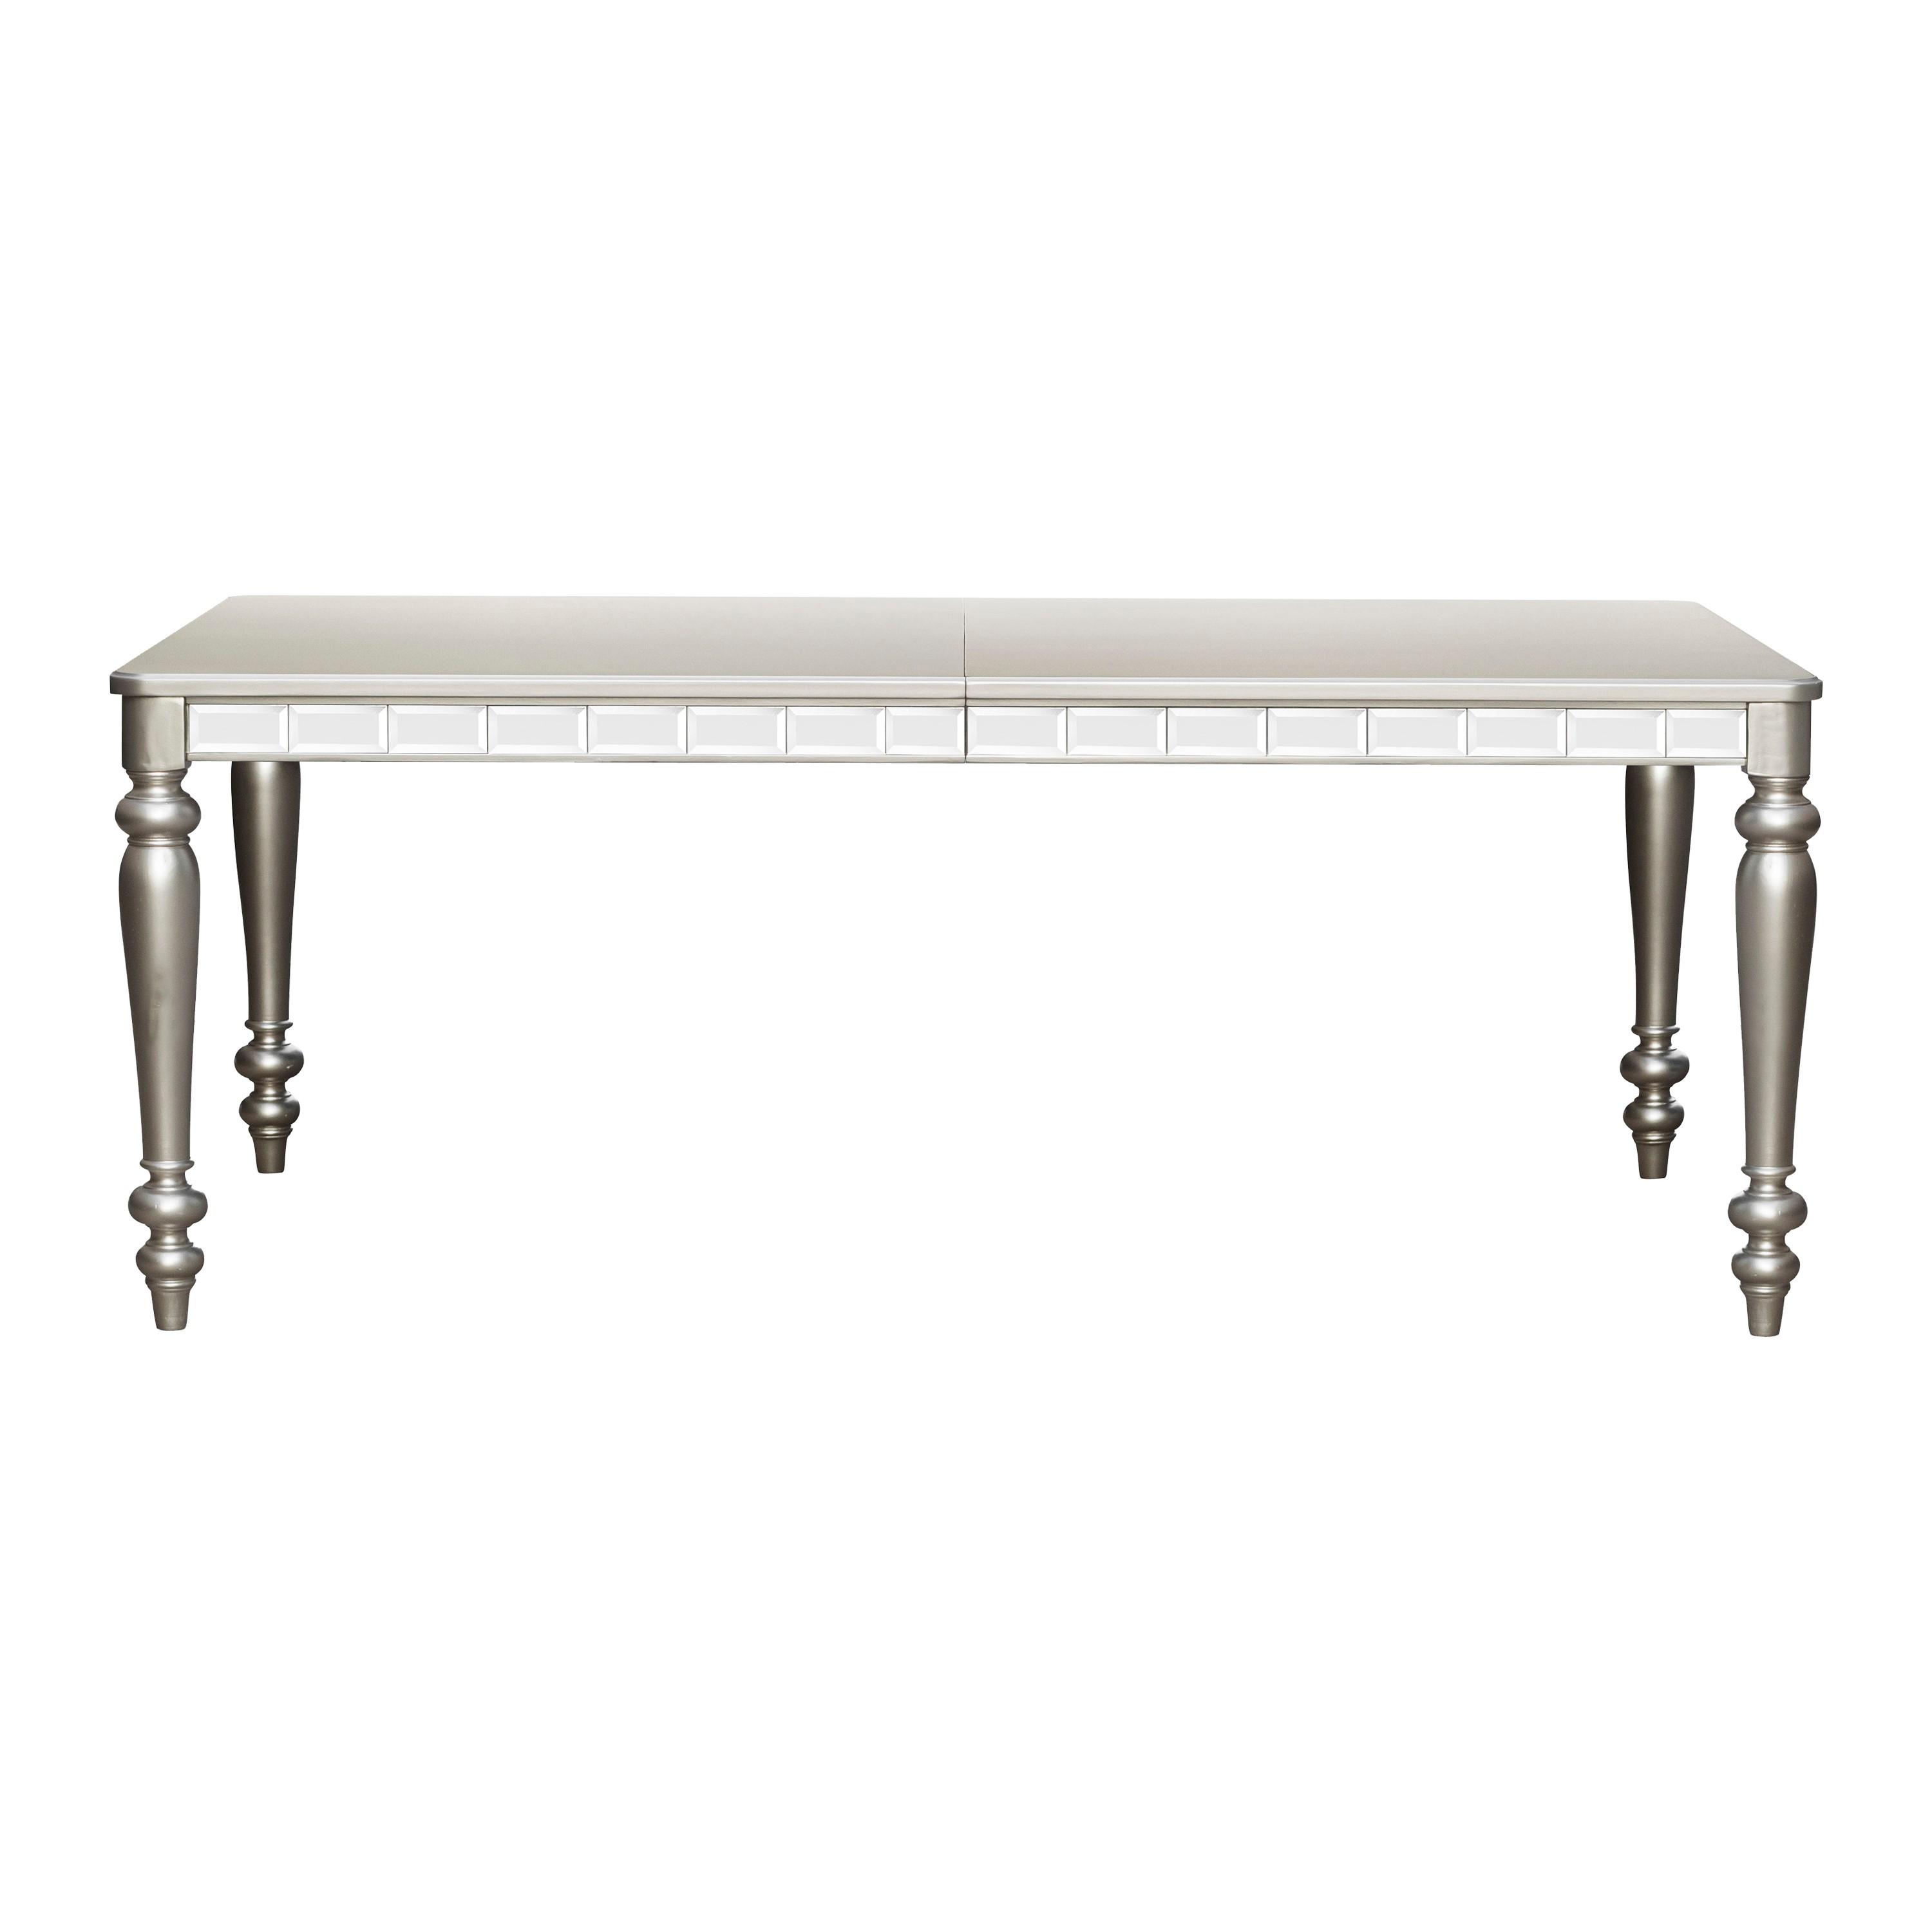 Modern Dining Table 5477N-96 Orsina 5477N-96 in Silver 